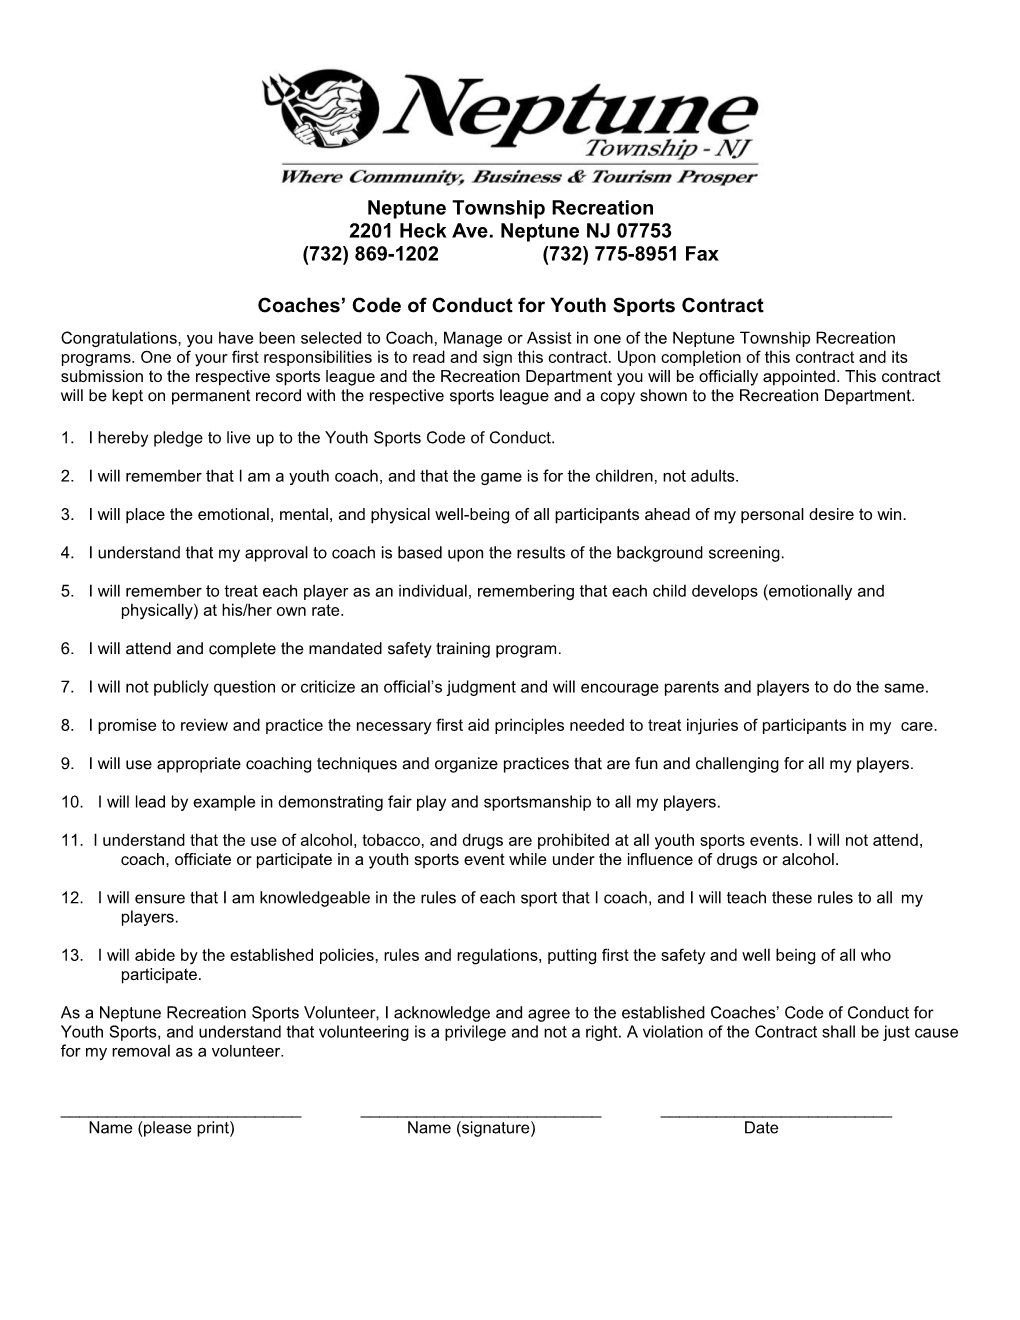 Coaches Code of Conduct for Youth Sports Contract